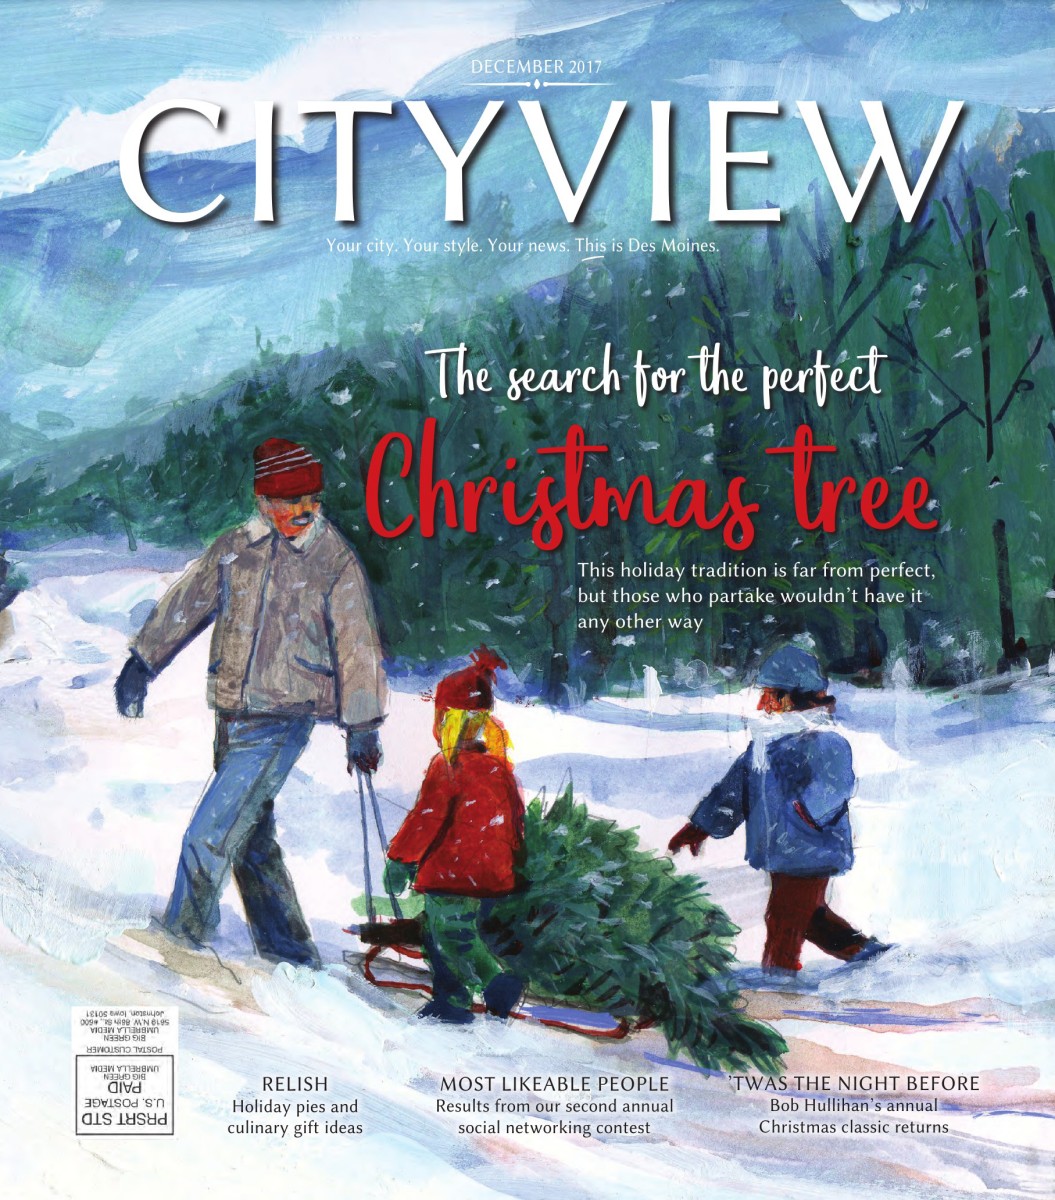 http://www.dmcityview.com/CityviewDecember2017/files/pages/tablet/1.jpg